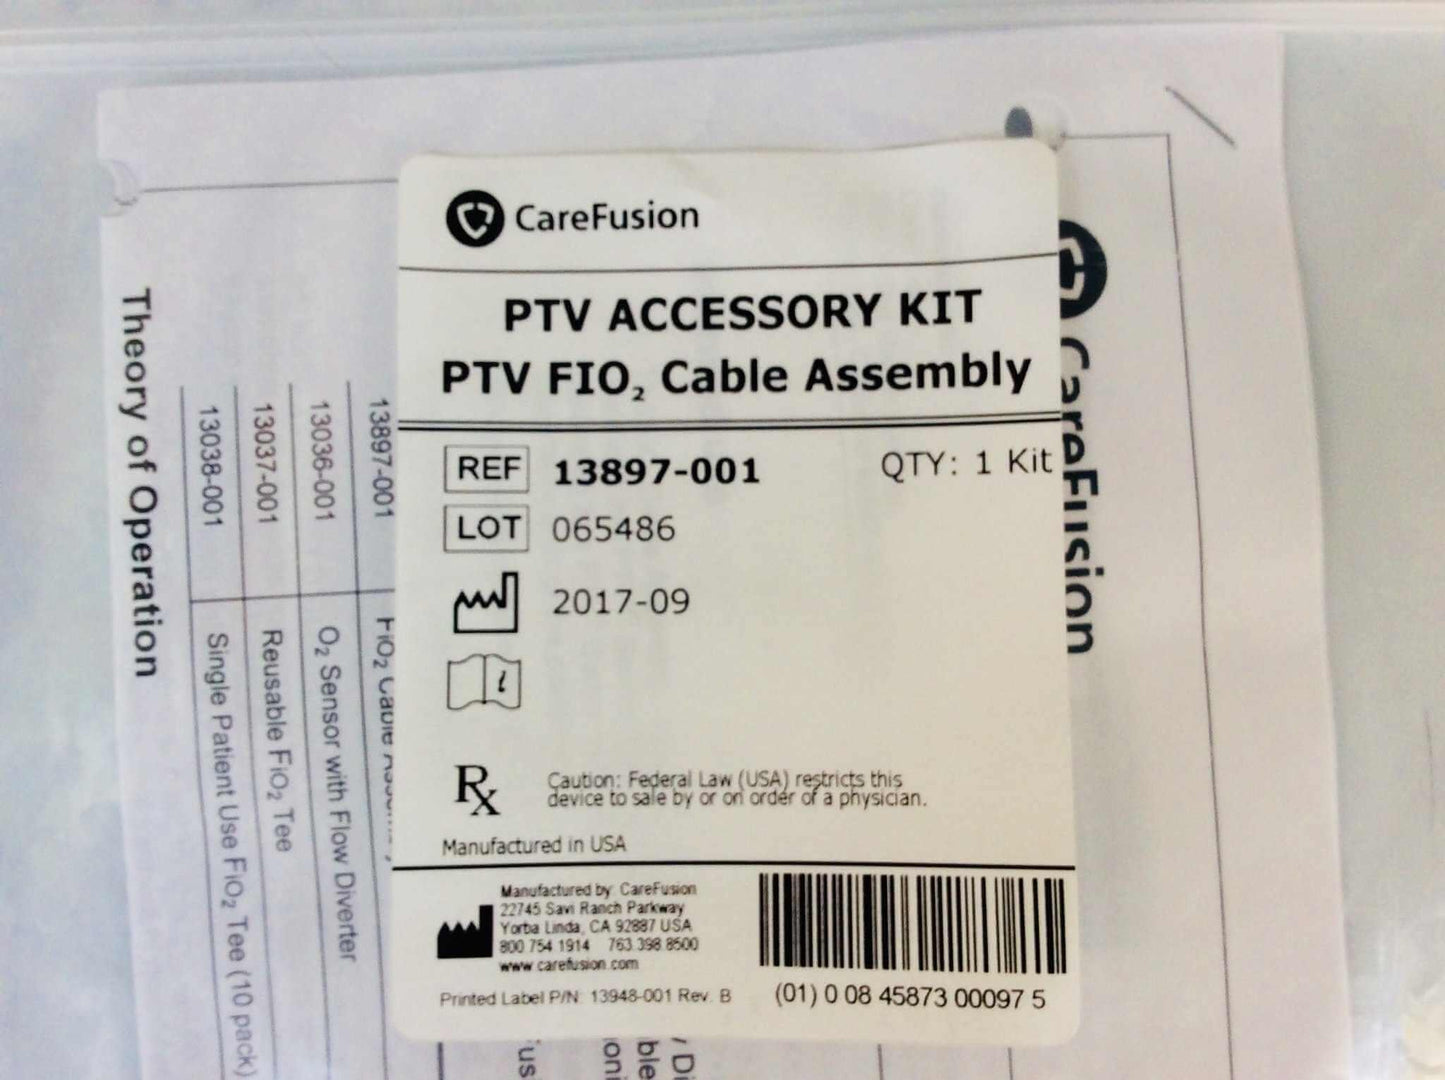 NEW CareFusion Vyaire ReVel EnVe PTV Accessory Kit PTV FIO2 Cable Assembly 13897-001 - MBR Medicals